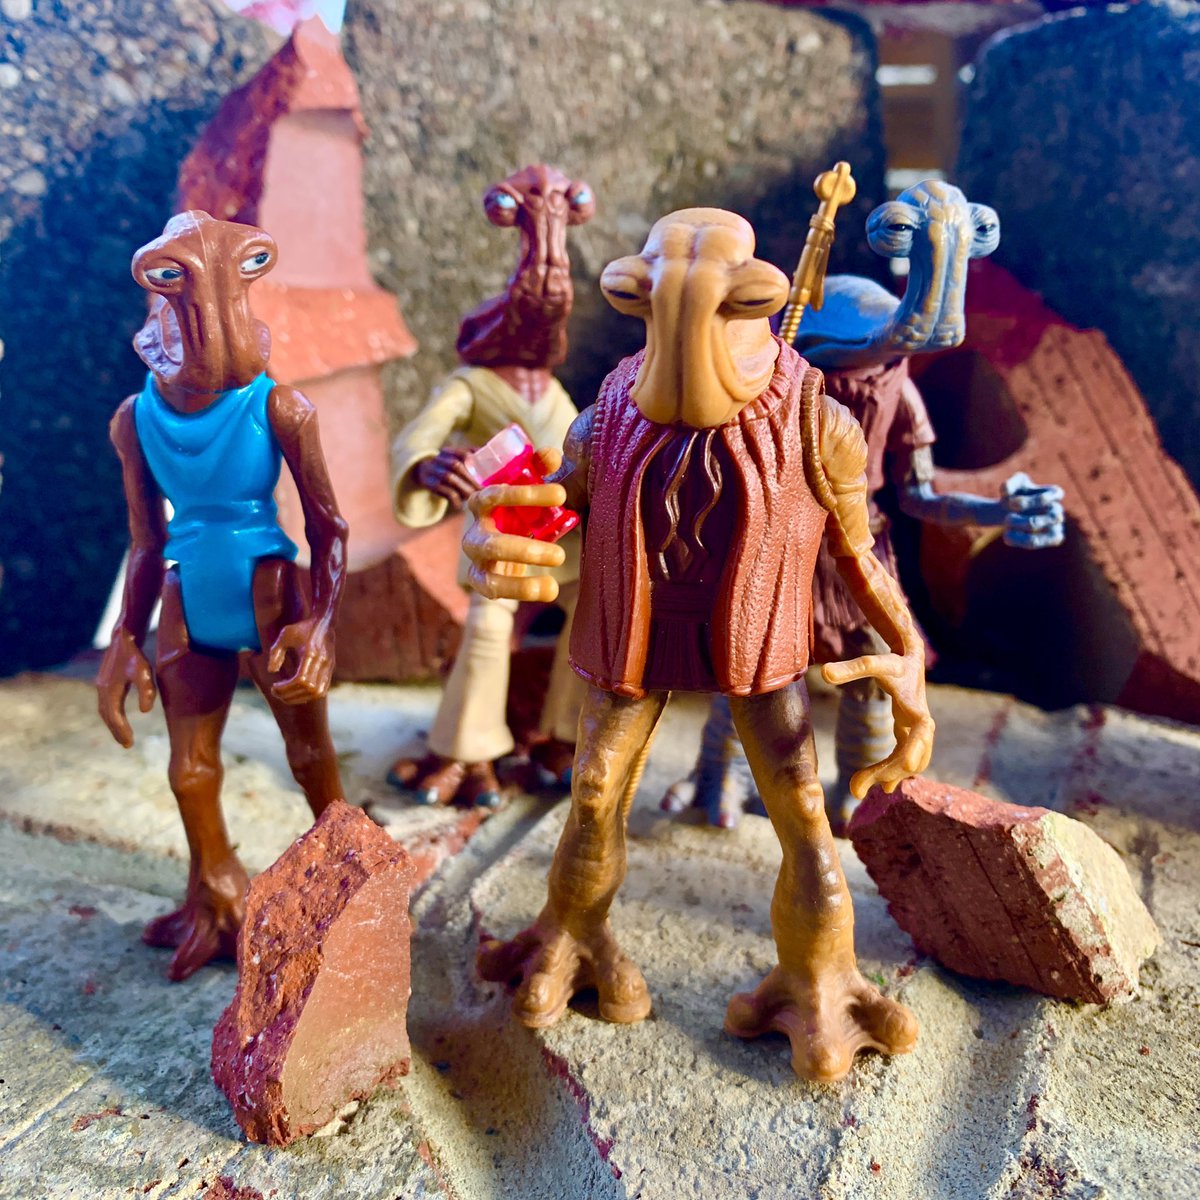 “Hammertime”

When the time comes for a modern update to the classic Star Wars Hammerhead figure what should it look like? 
#starwars #swtvc #team375  #keep375alive #teamtvc #fightfortvc #backtvc #tvc #thevintagecollection #swthevintagecollection #starwarsthevintagecollection